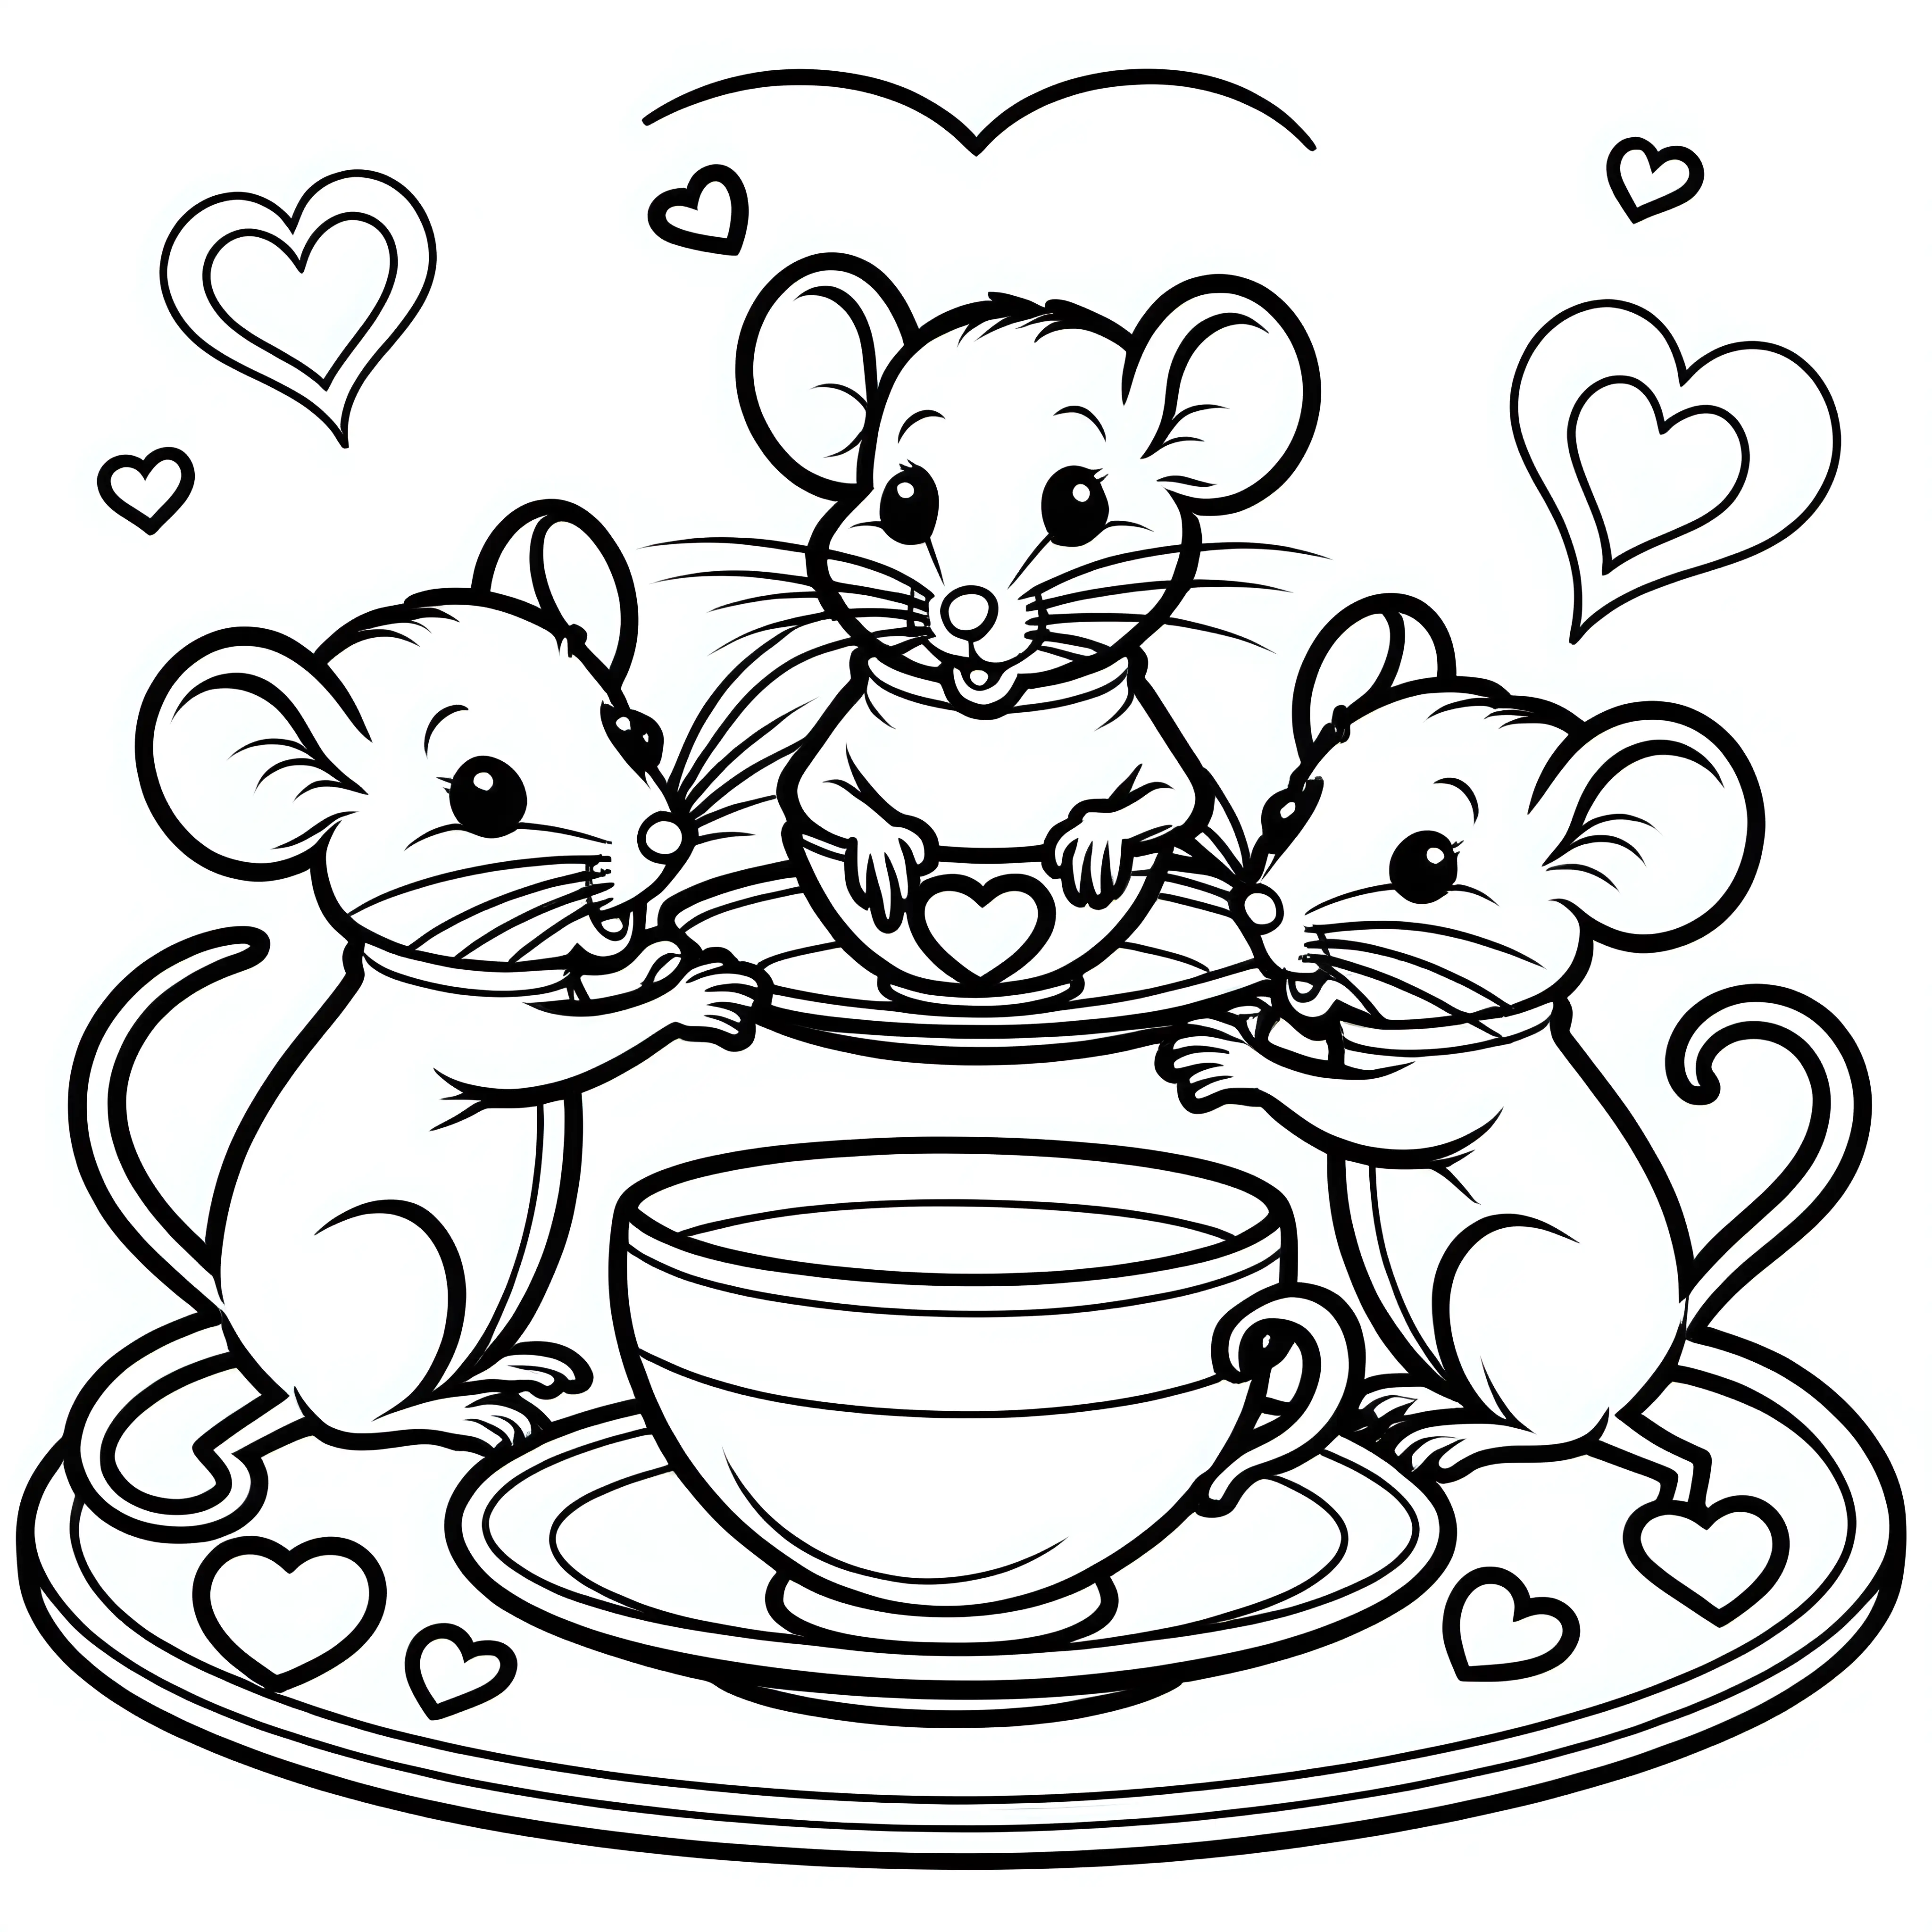 Adorable Mice Sipping from HeartAdorned Teacups Delightful Coloring Page